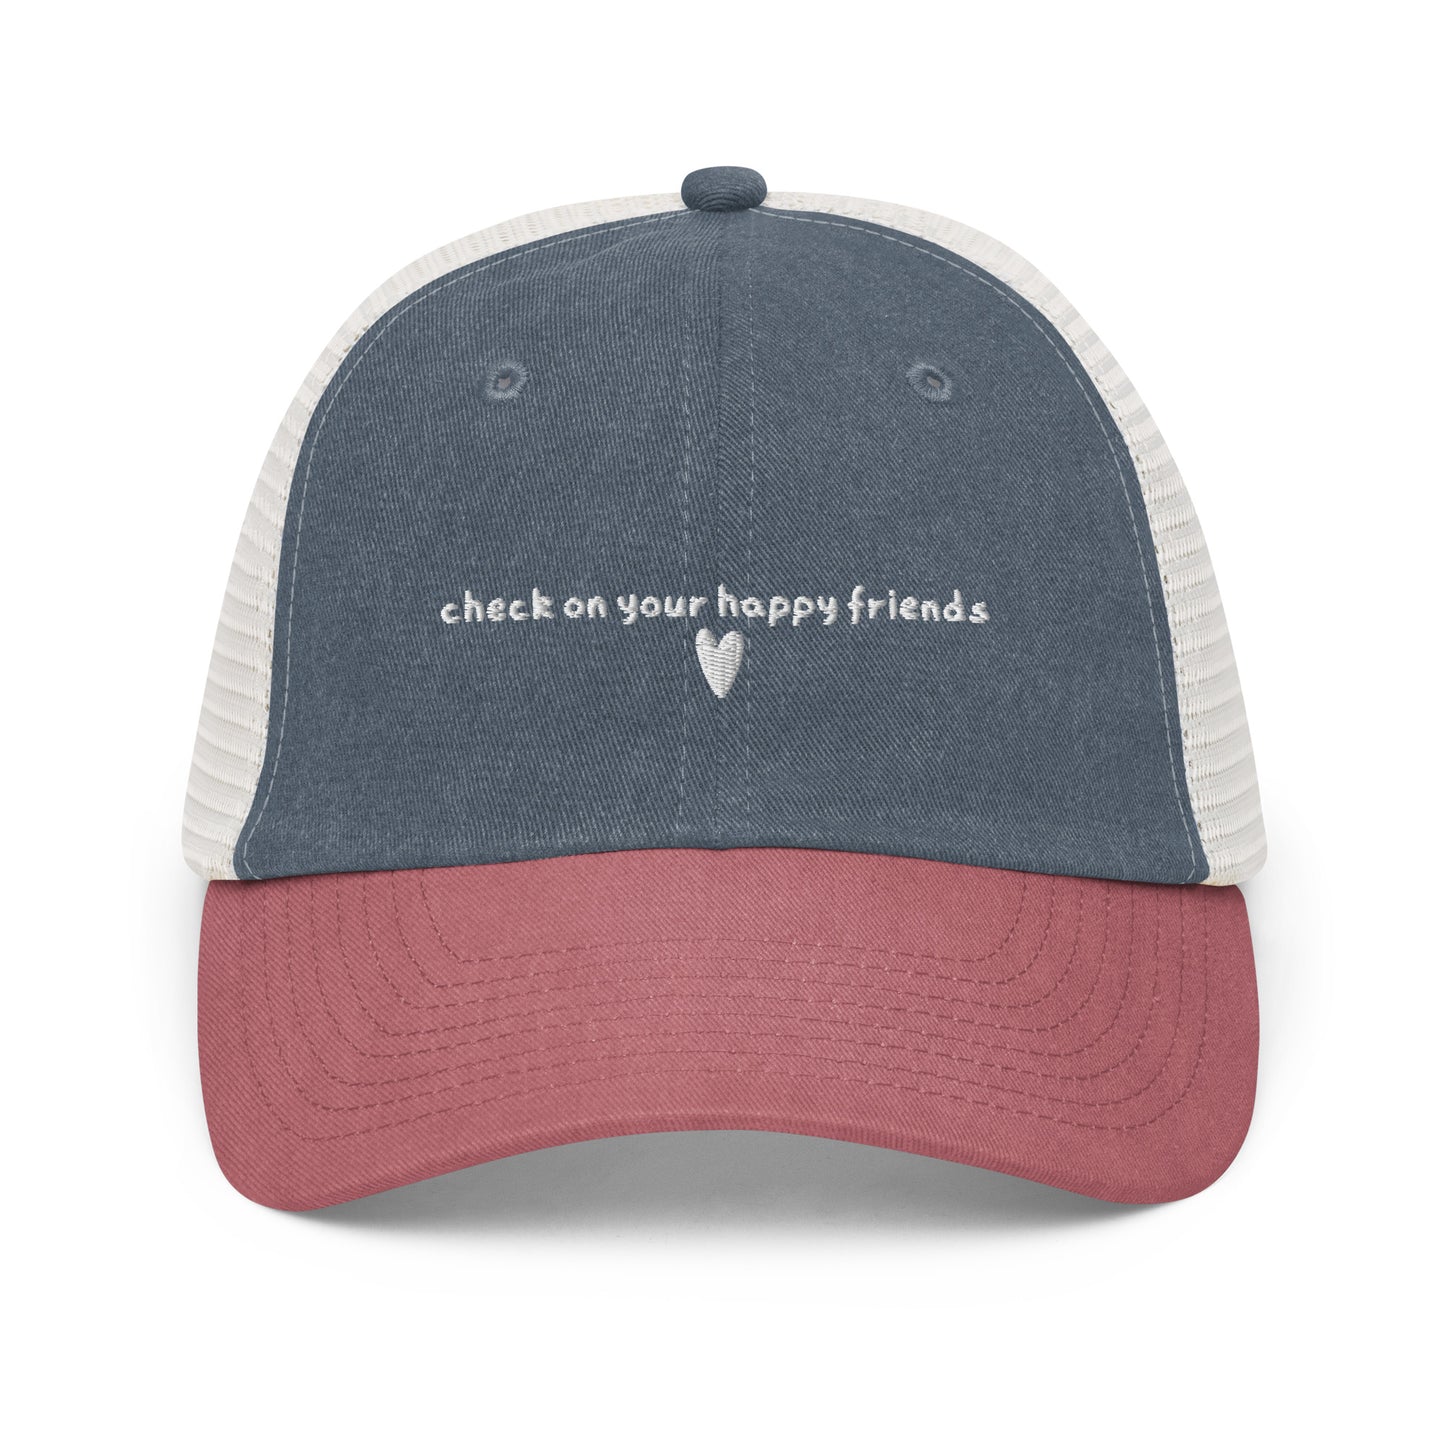 Embroidered 'check on your happy friends' Vintage Baseball Cap